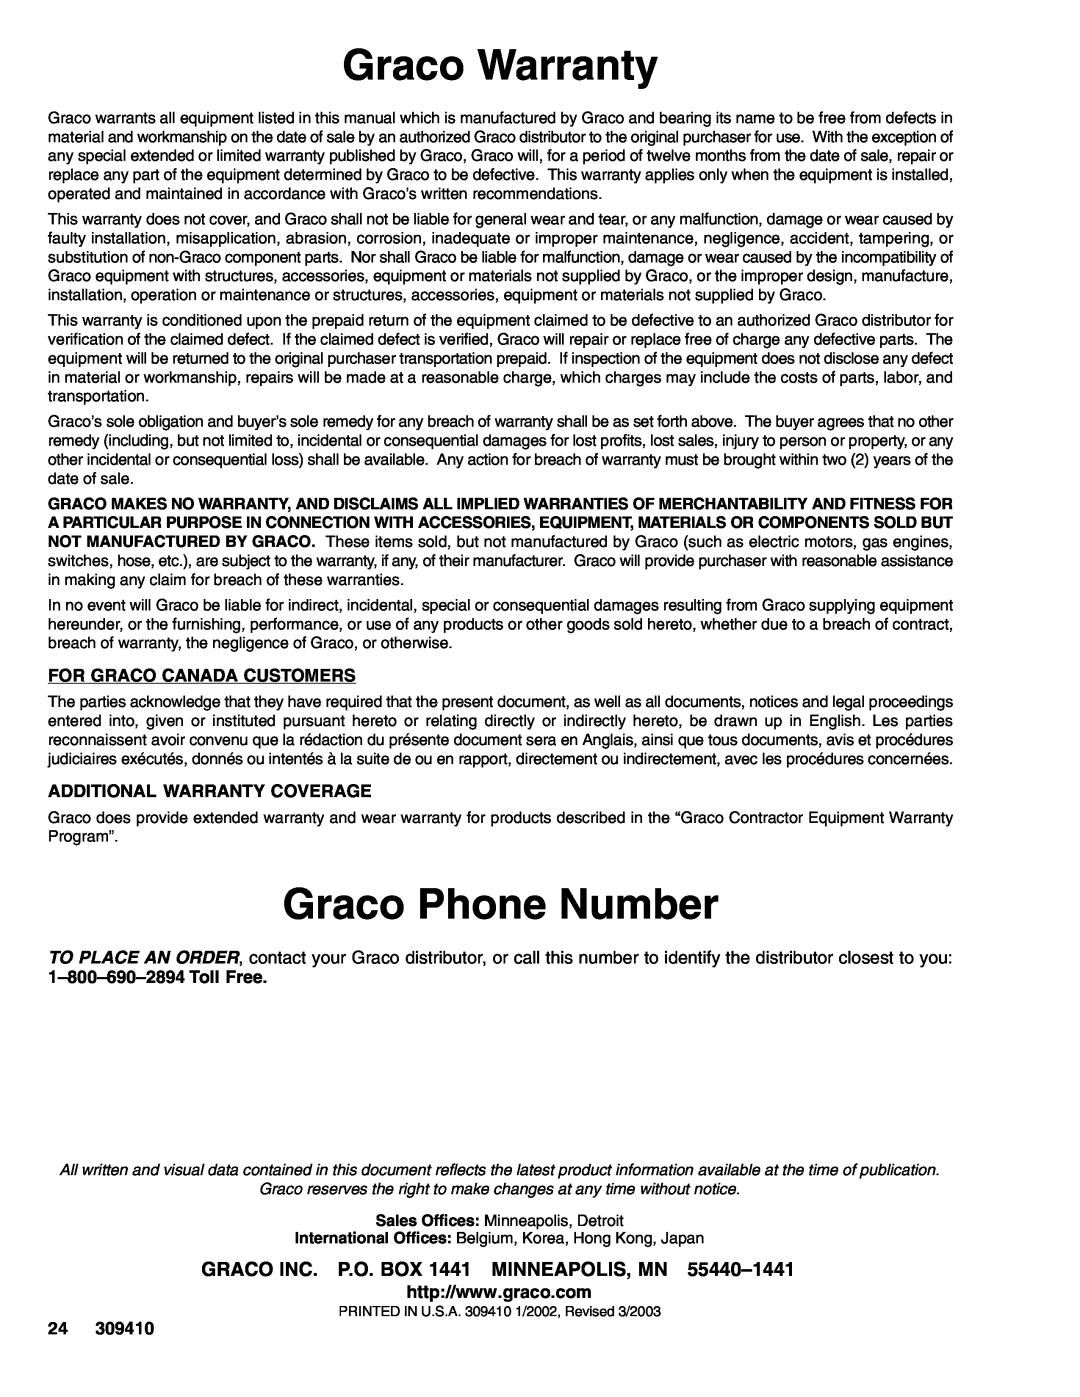 Graco Inc 309410 manual Graco Warranty, Graco Phone Number, For Graco Canada Customers, Additional Warranty Coverage 